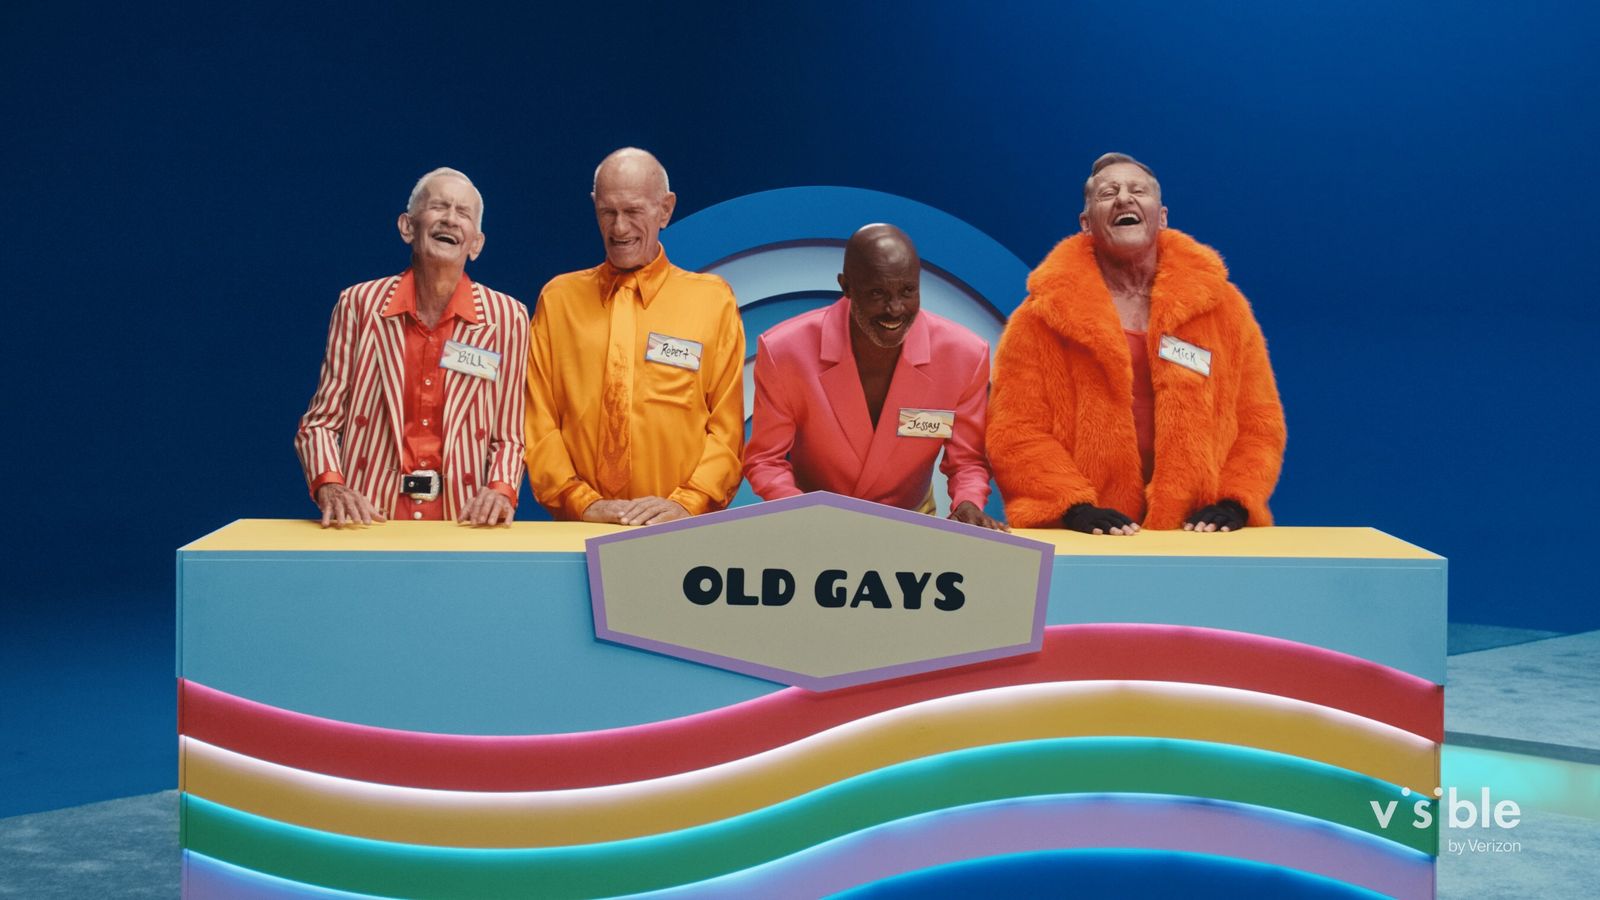 VISIBLE PRIDE The Old Gays